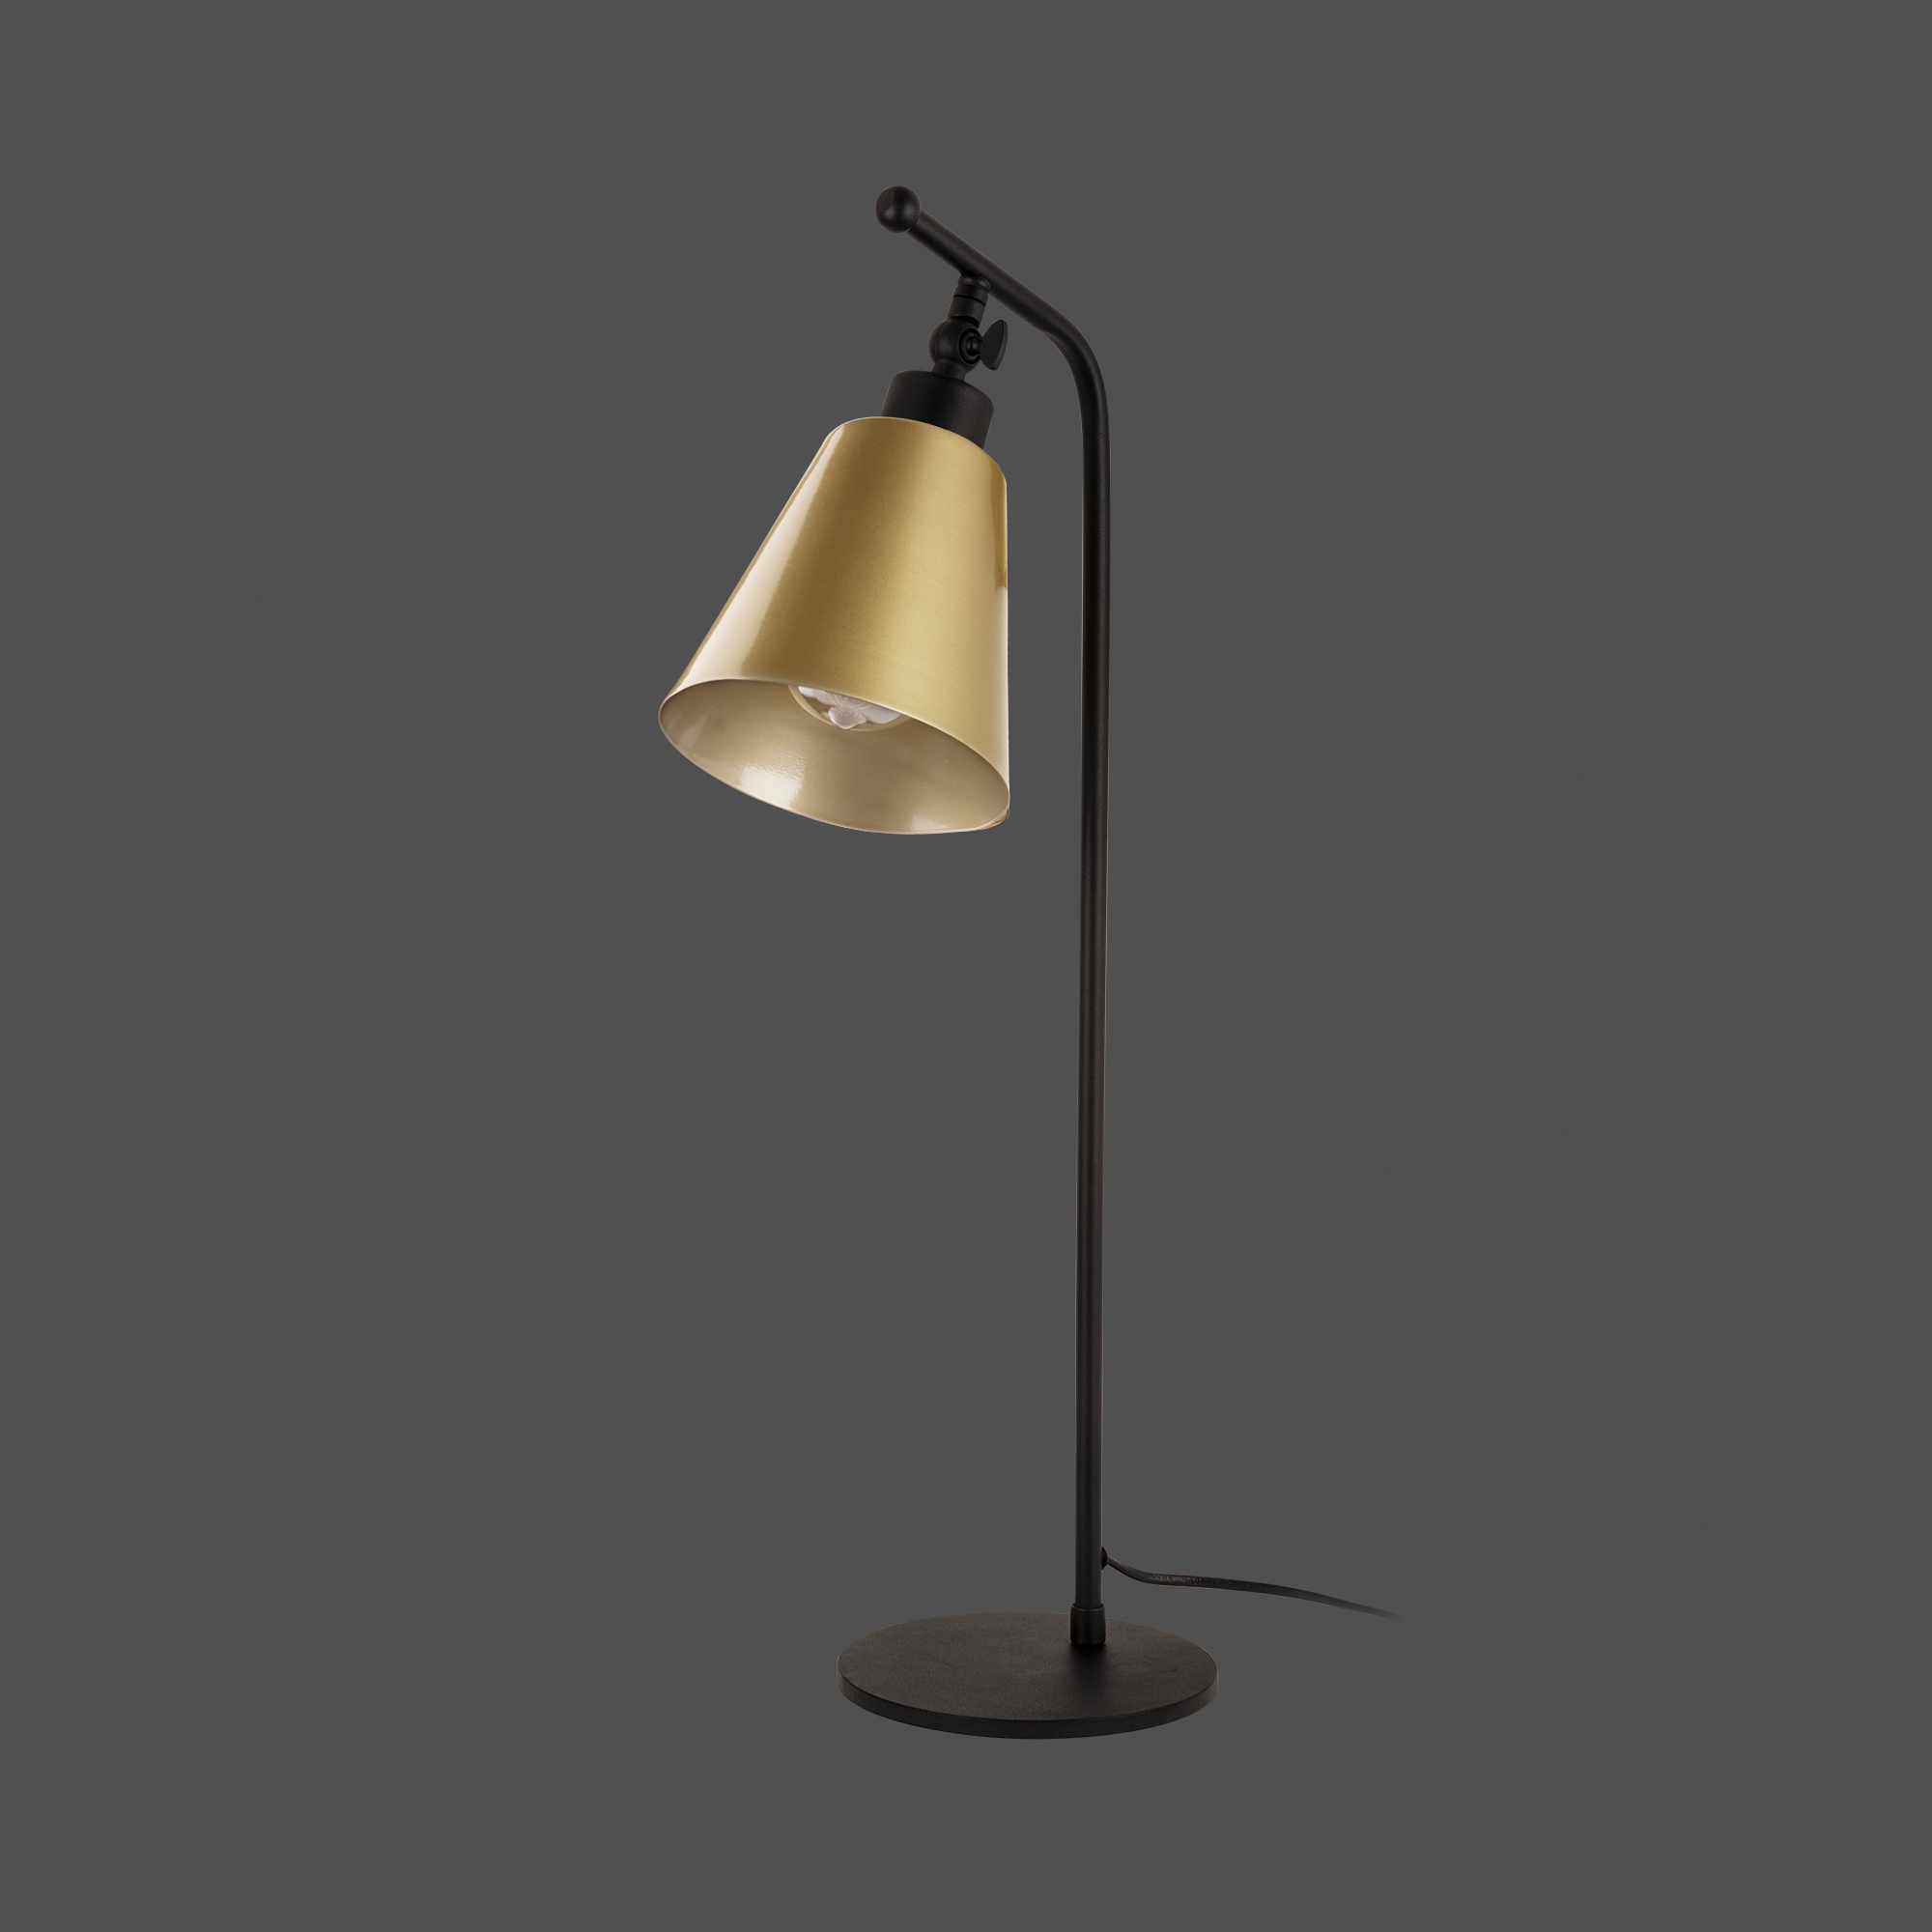 ICON Table Lamp